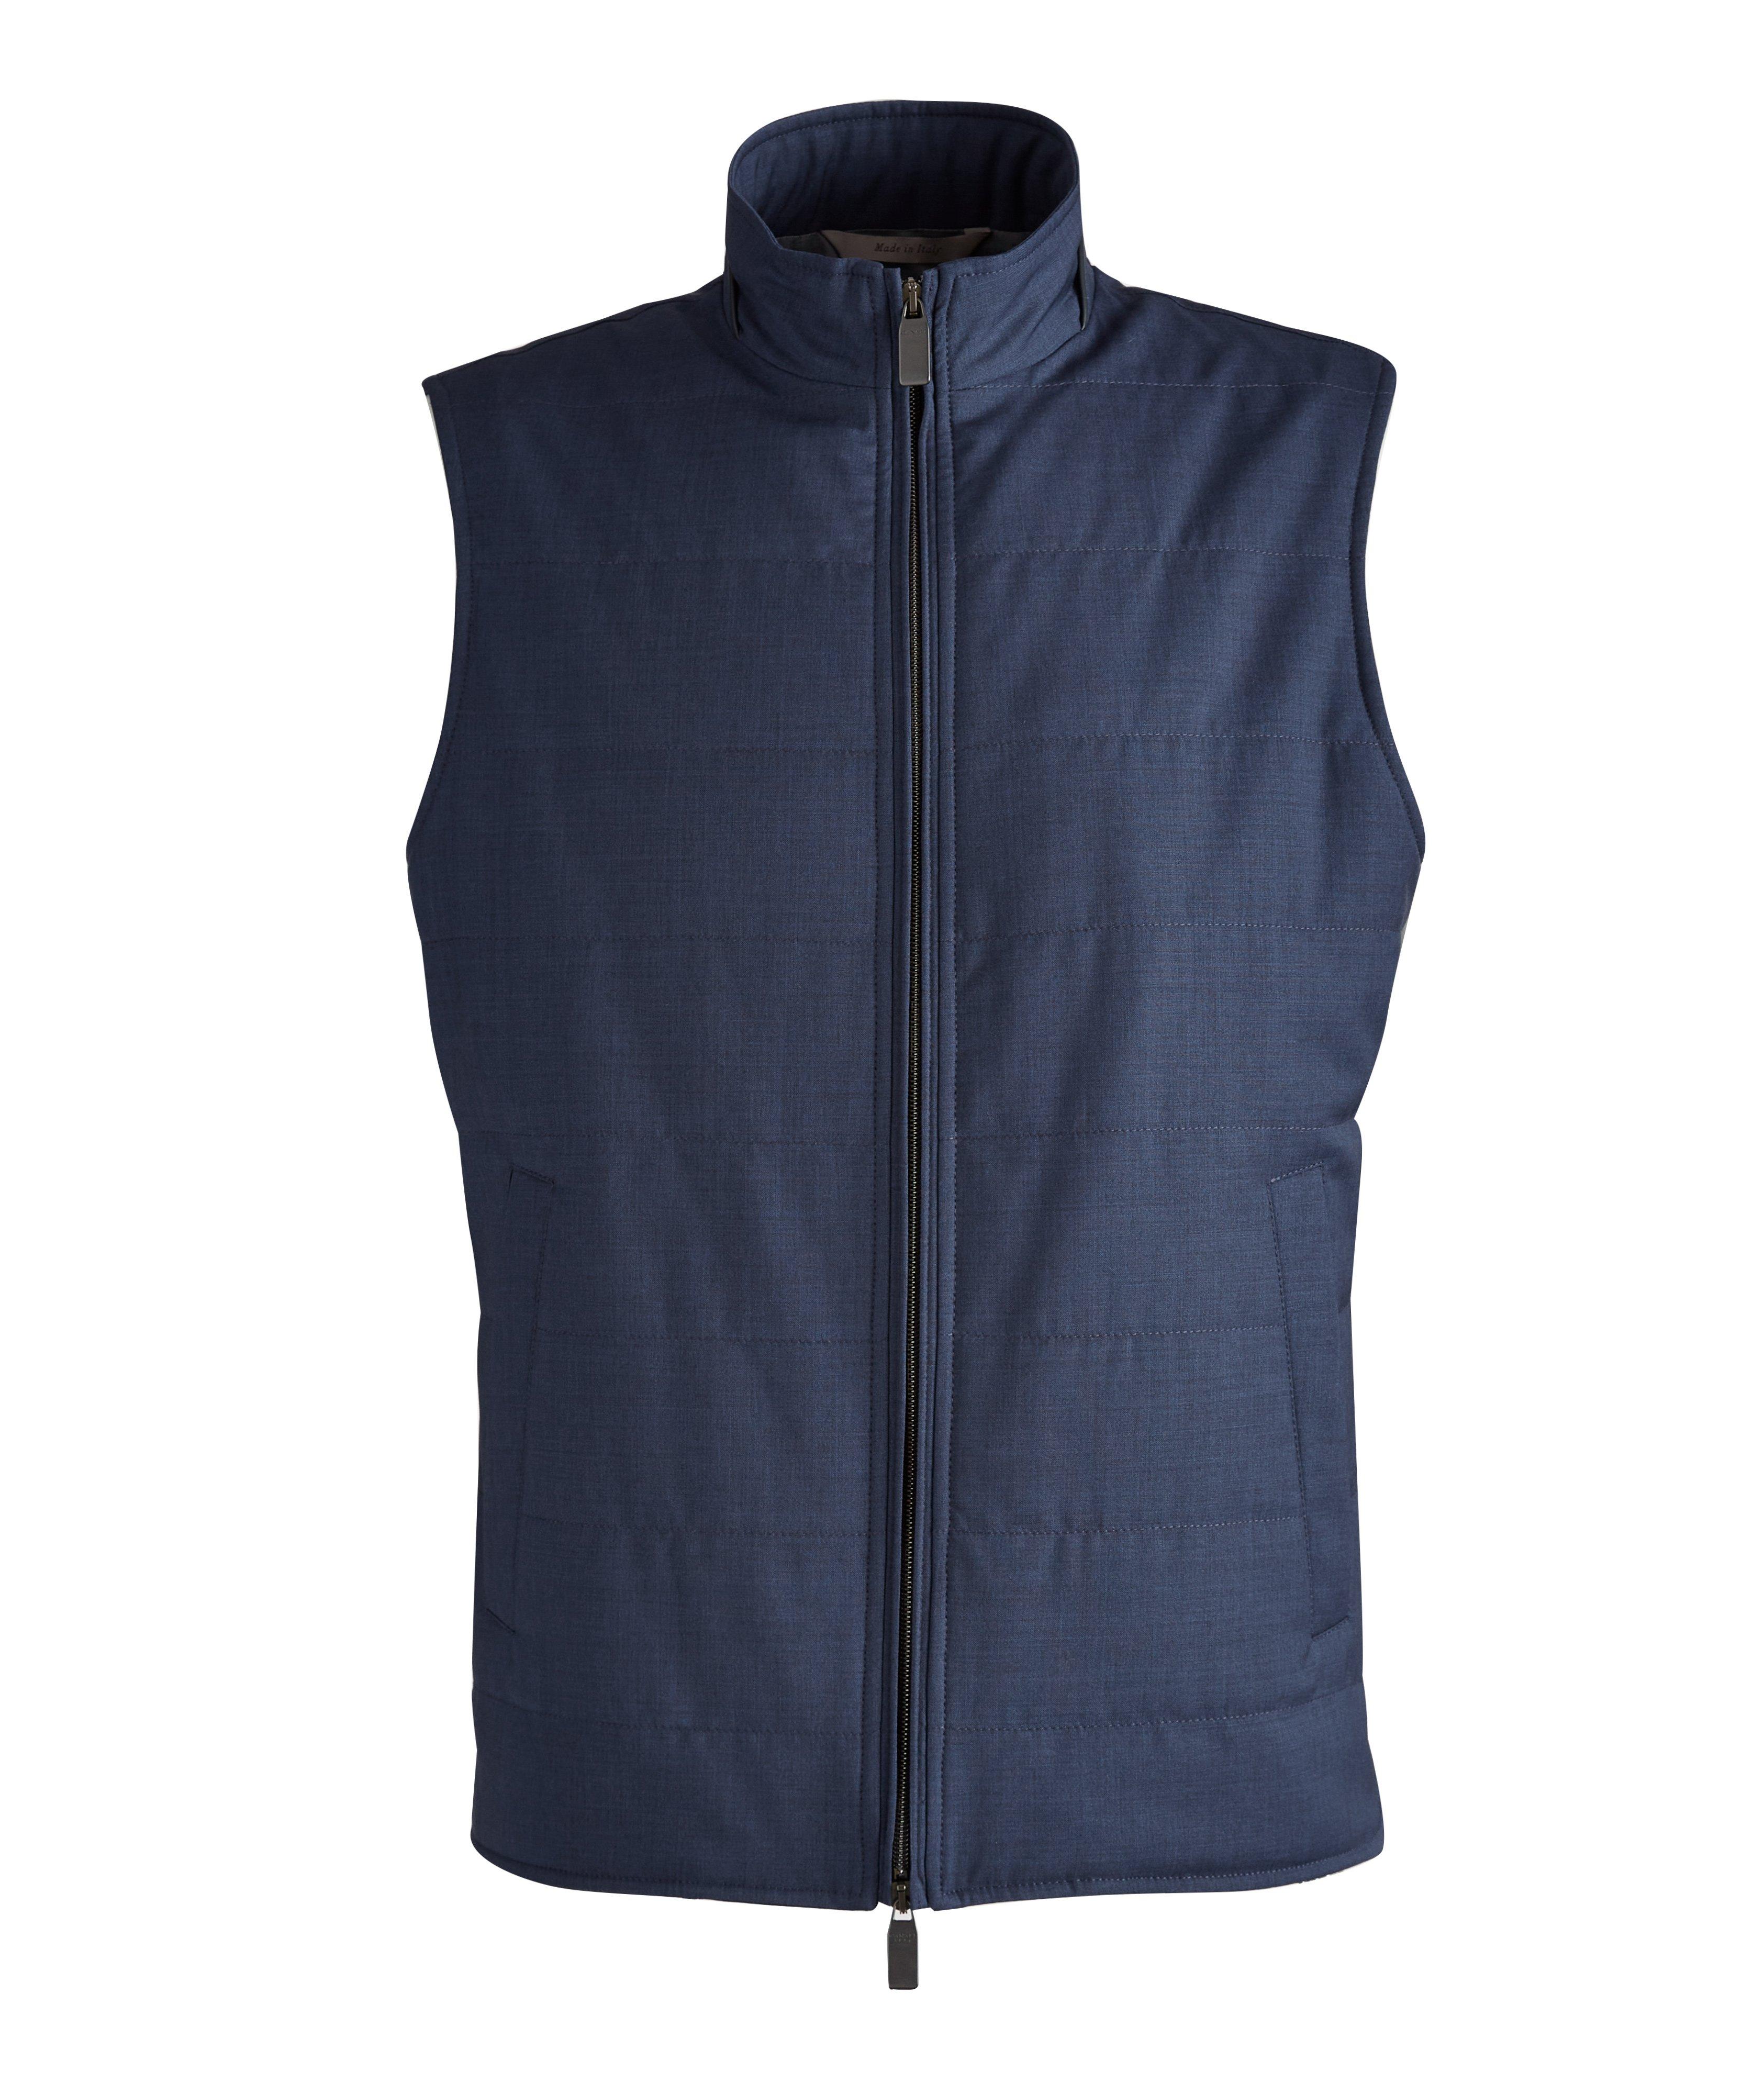 Impeccable Lightweight Quilted Wool Vest image 0